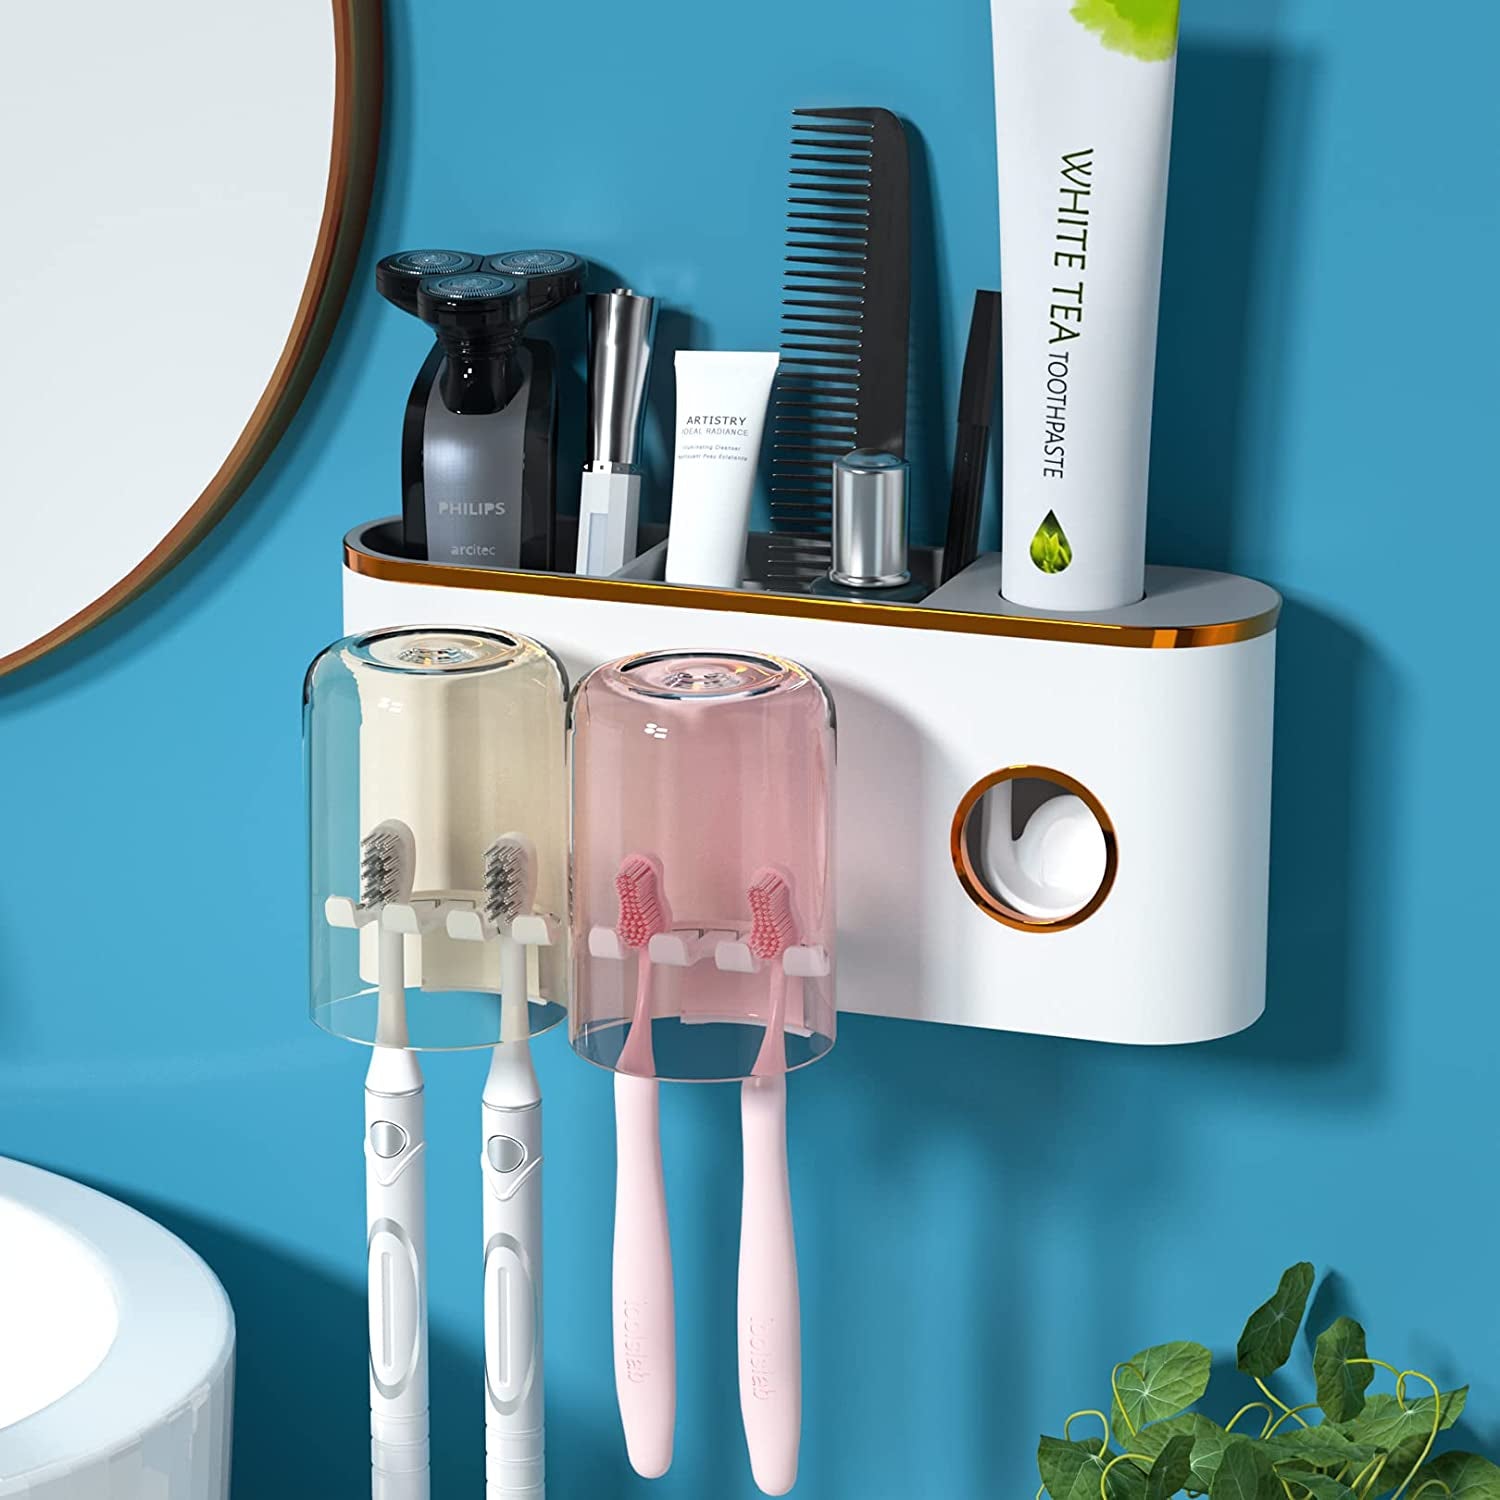 Wall Mounted Automatic Toothpaste Dispenser with Dust-Proof Cover and 2 Toothpaste Squeezer, 2 Electric Toothbrush Holders and 4 Toothbrush Organizer Slots